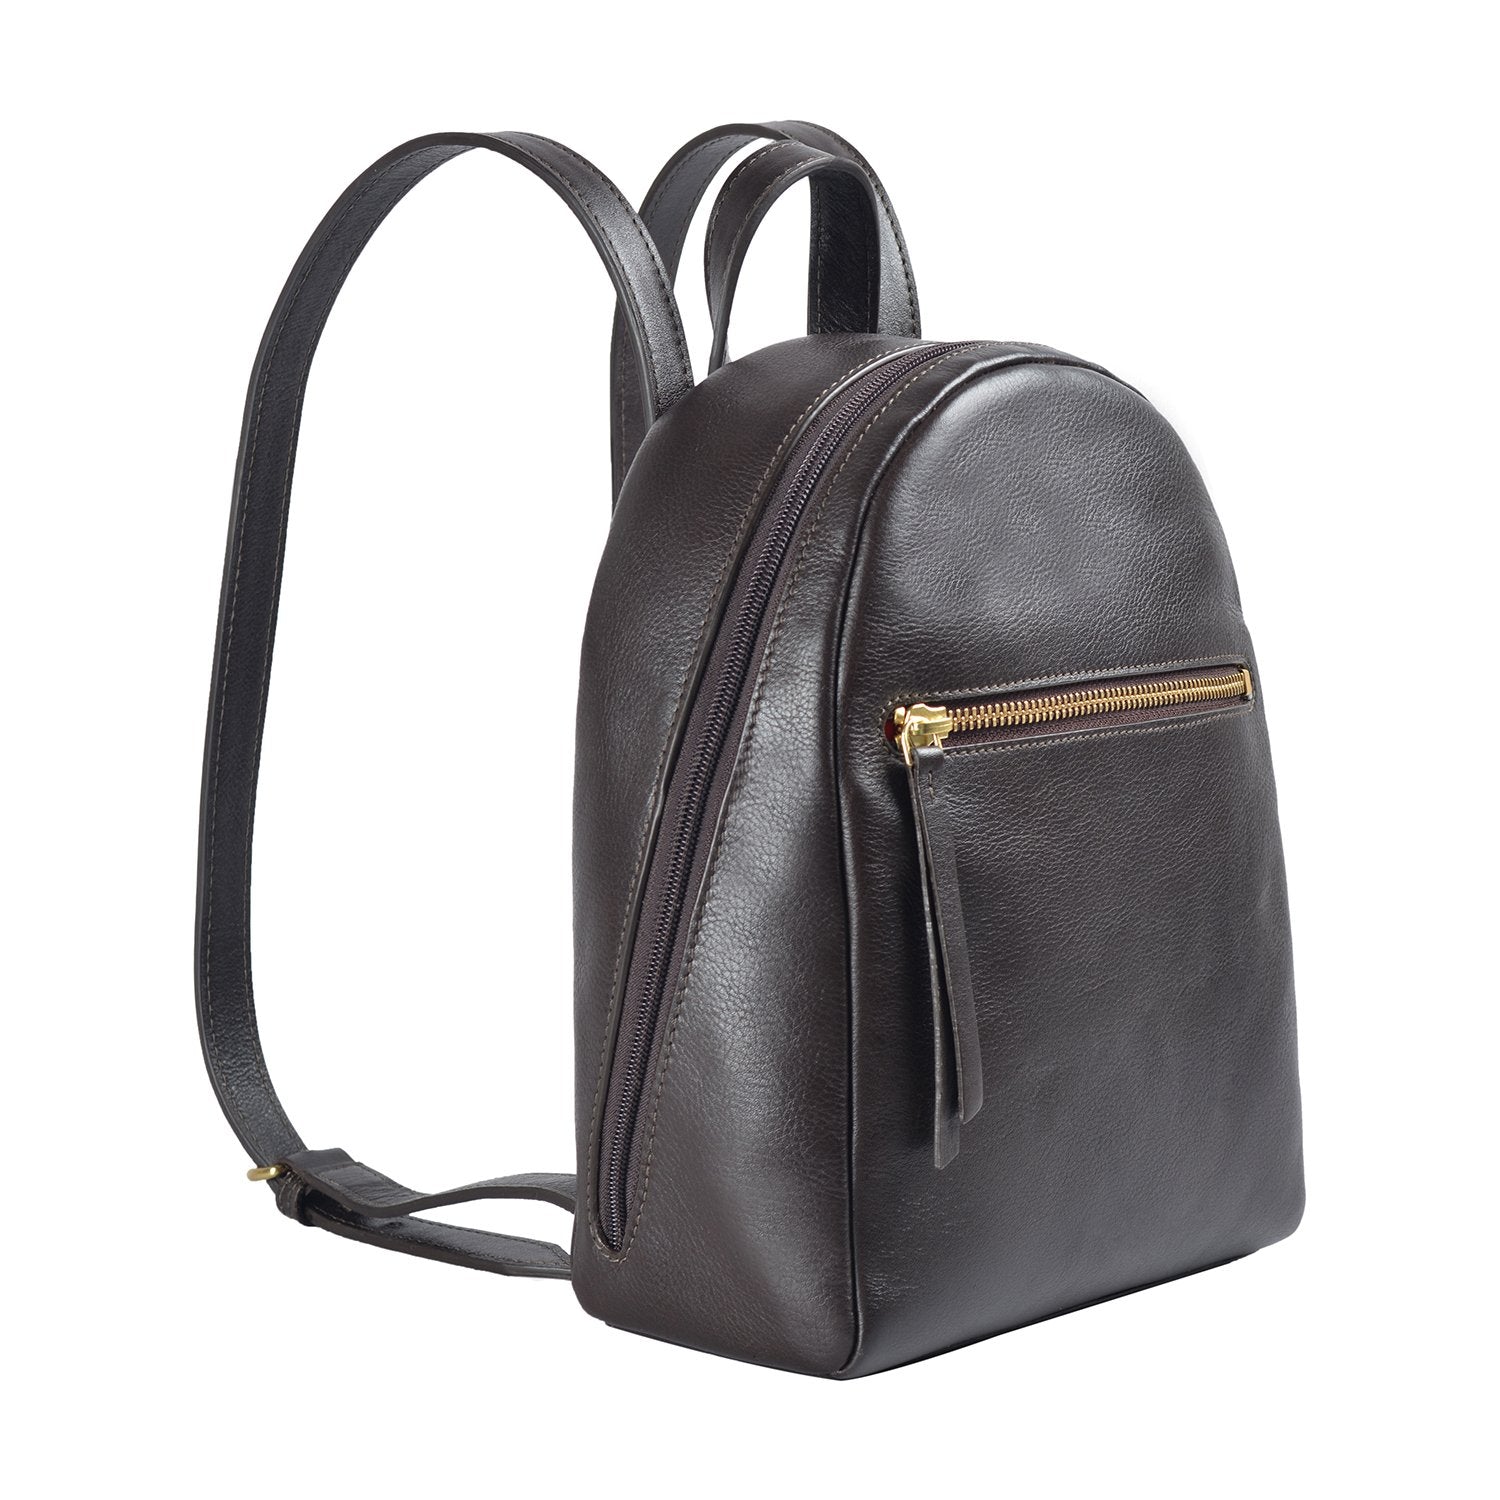 Kiwi Small Leather Backpack - KME means the very best